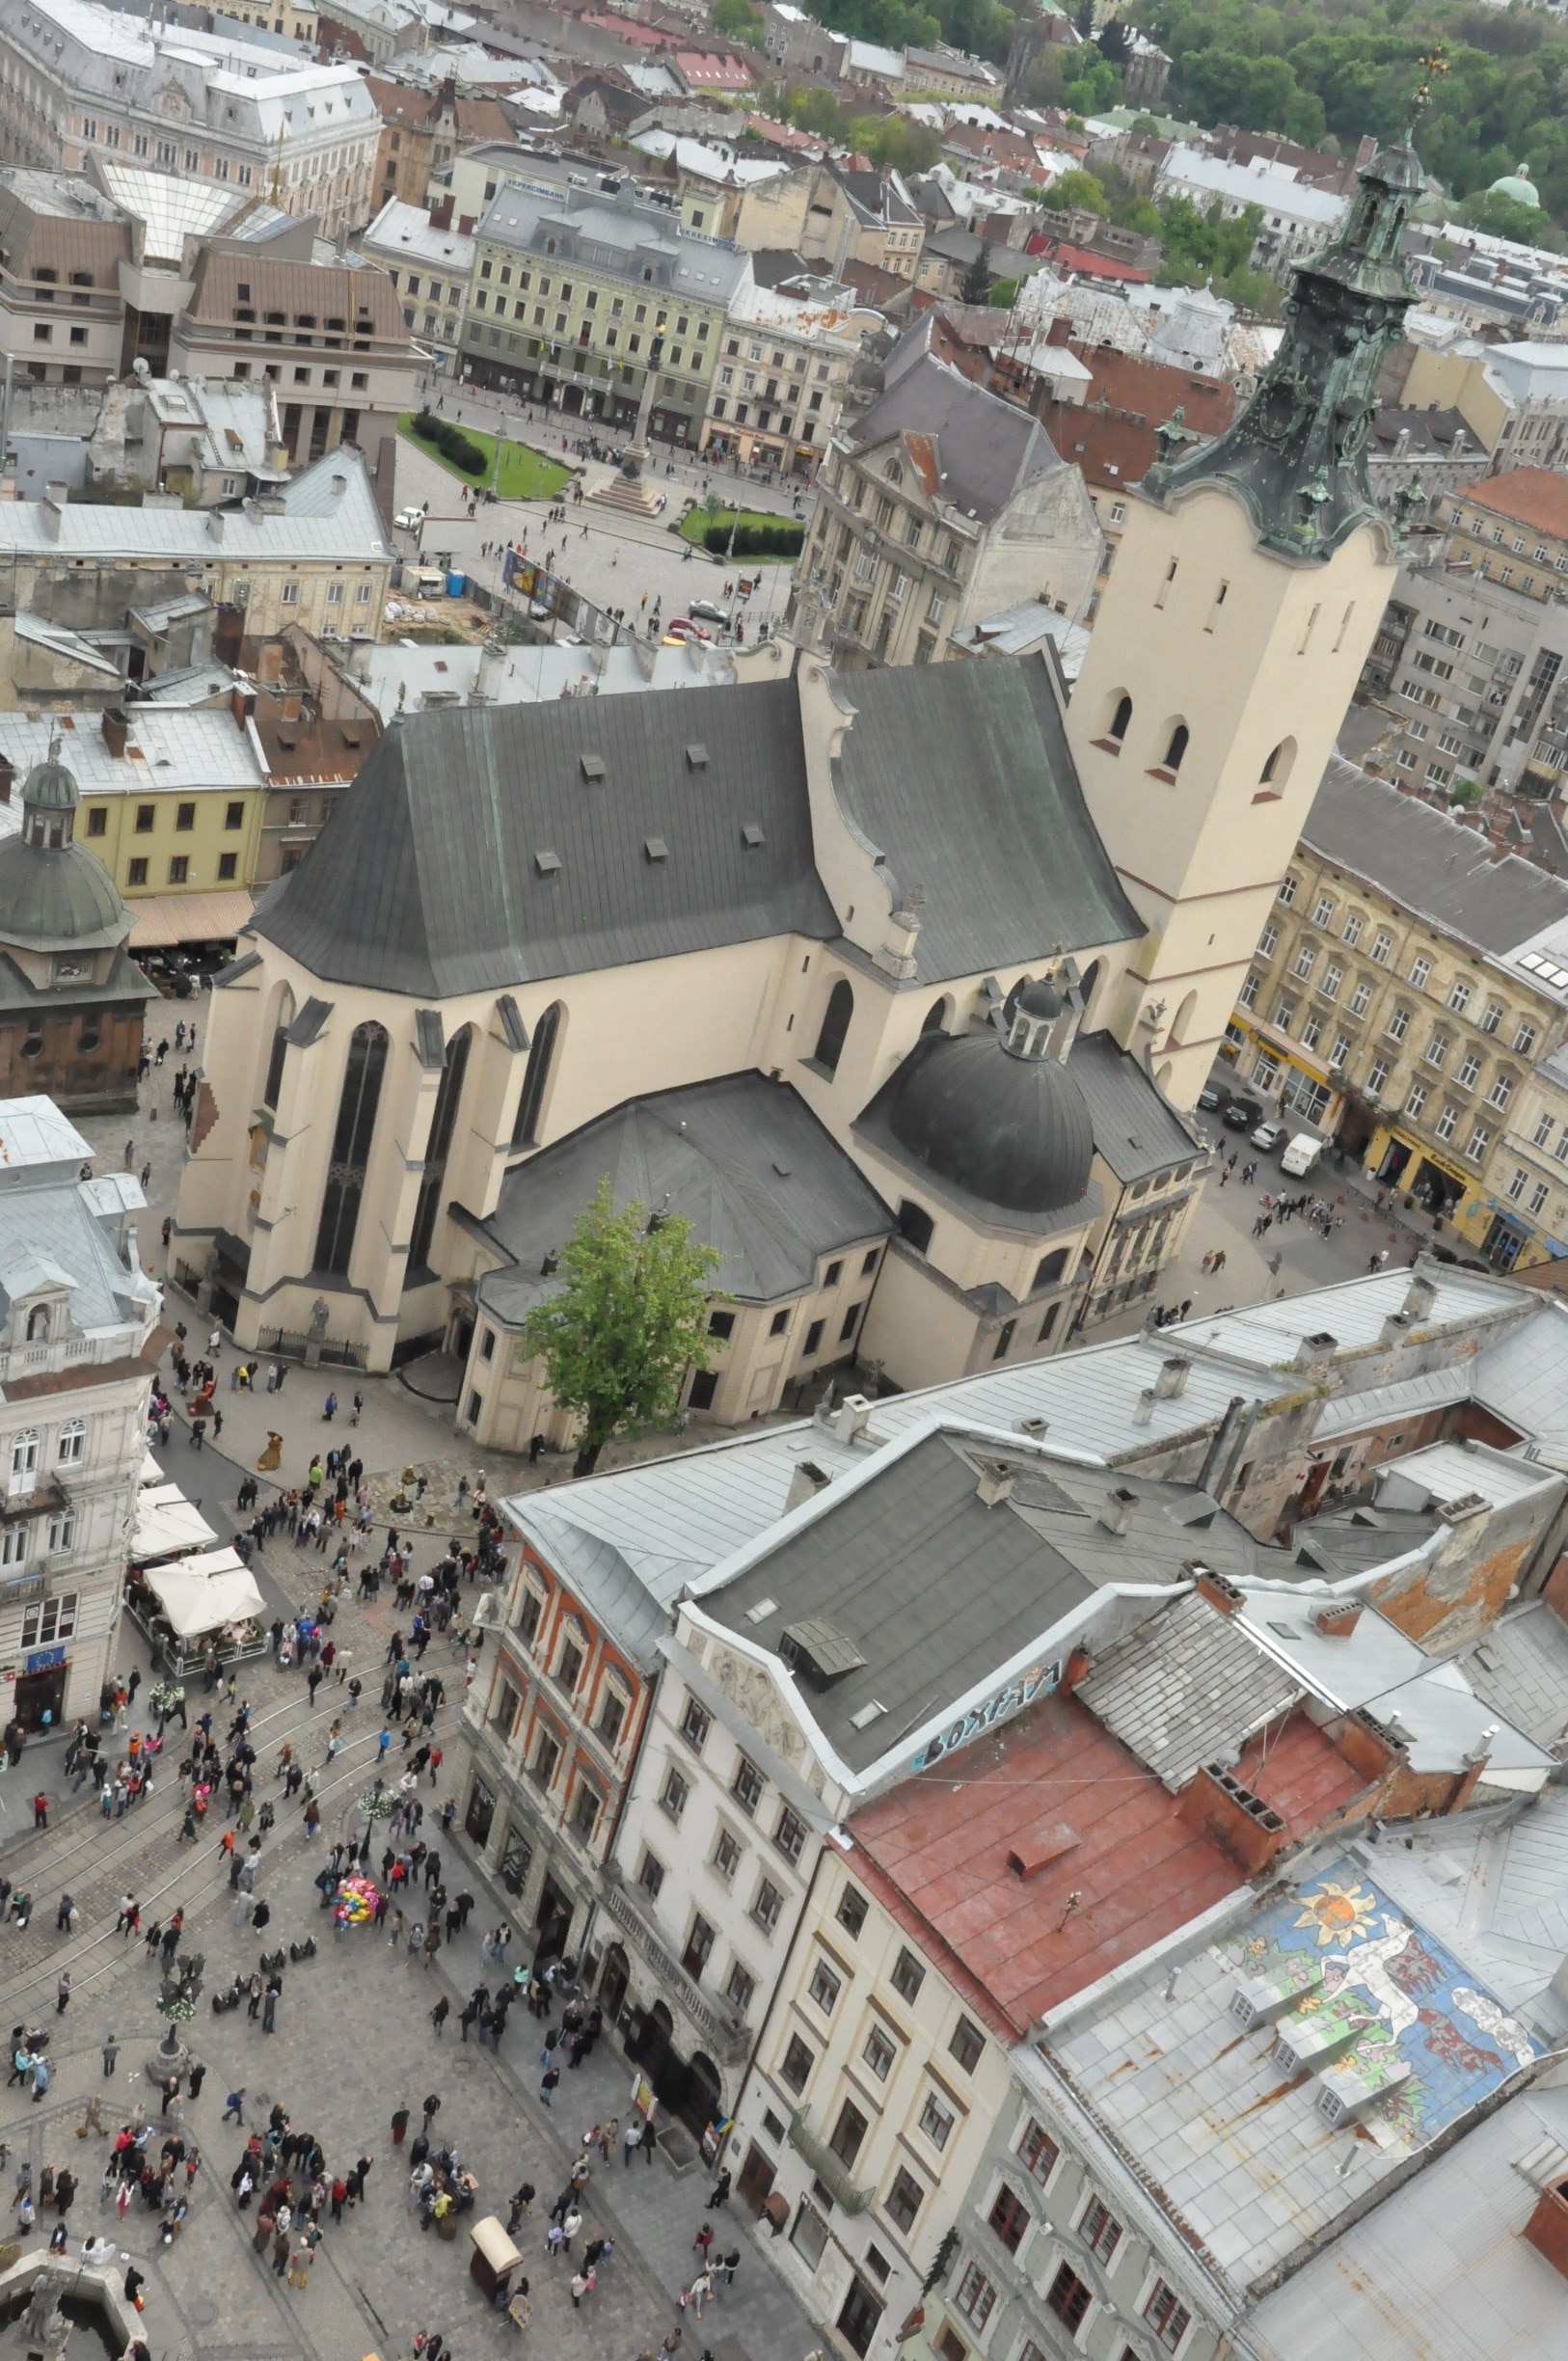 Lovely view of old Lviv from the top of the tower in the center of Ploscha Rynok.  That's the Latin Cathedral, one of the oldest still-active churches in the city.  To climb the tower, go up the first four flights of stairs to the ticket desk.  The way is clearly marked with signs in multiple languages, including English.  At the desk, pay 10 hrivna and then keep climbing up, up, and up until you reach the open deck at the top of the tower.  Then enjoy the view!